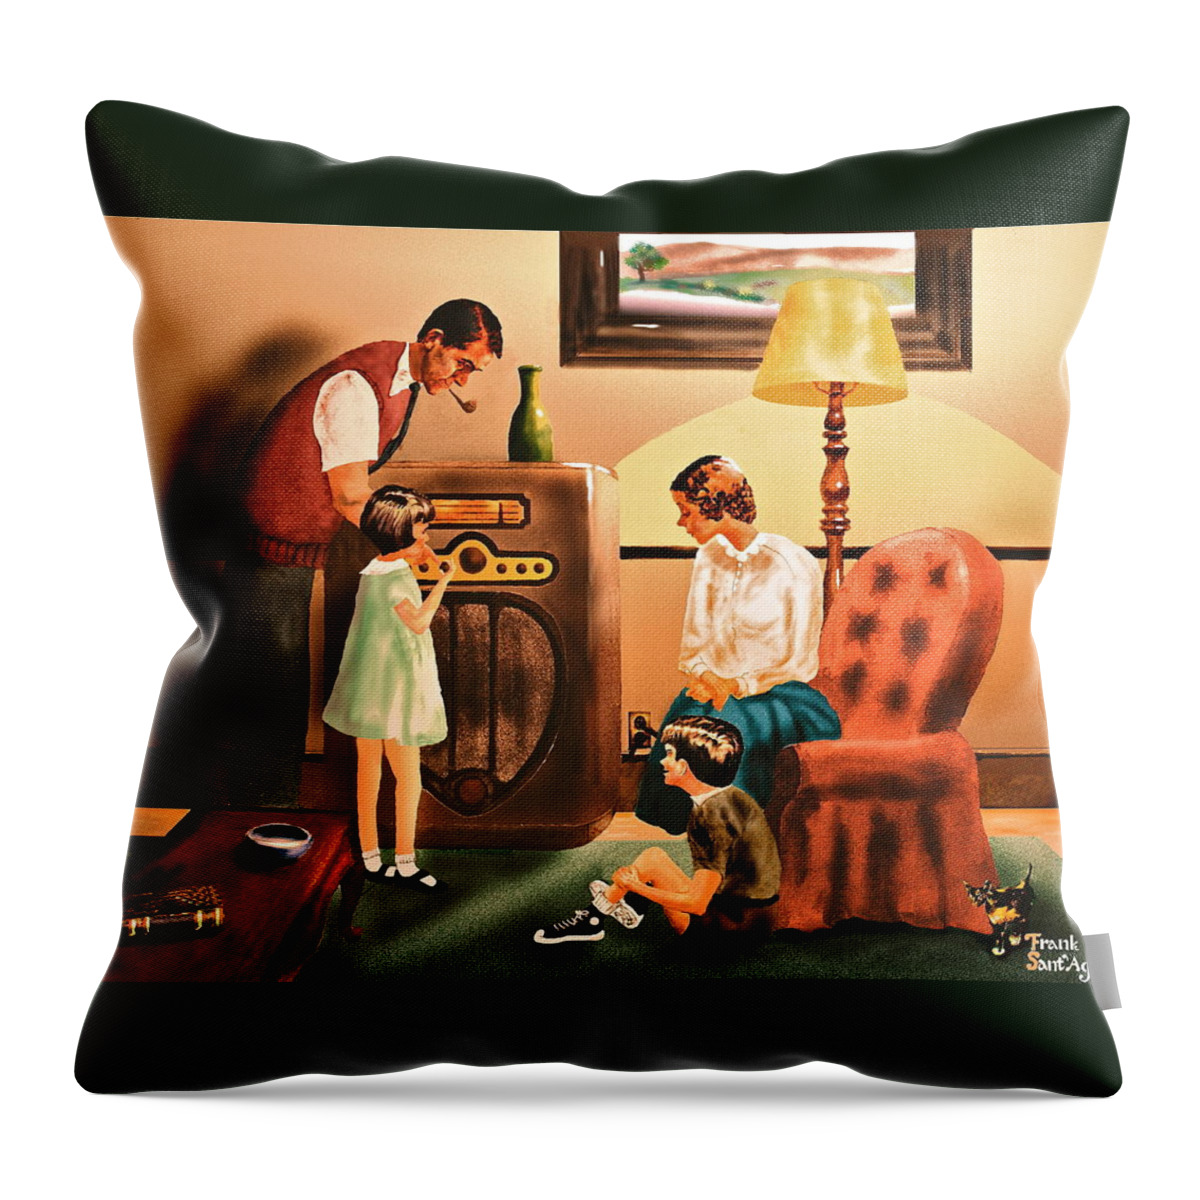 Radio Throw Pillow featuring the painting Remember when we Listened to the Radio by Frank SantAgata